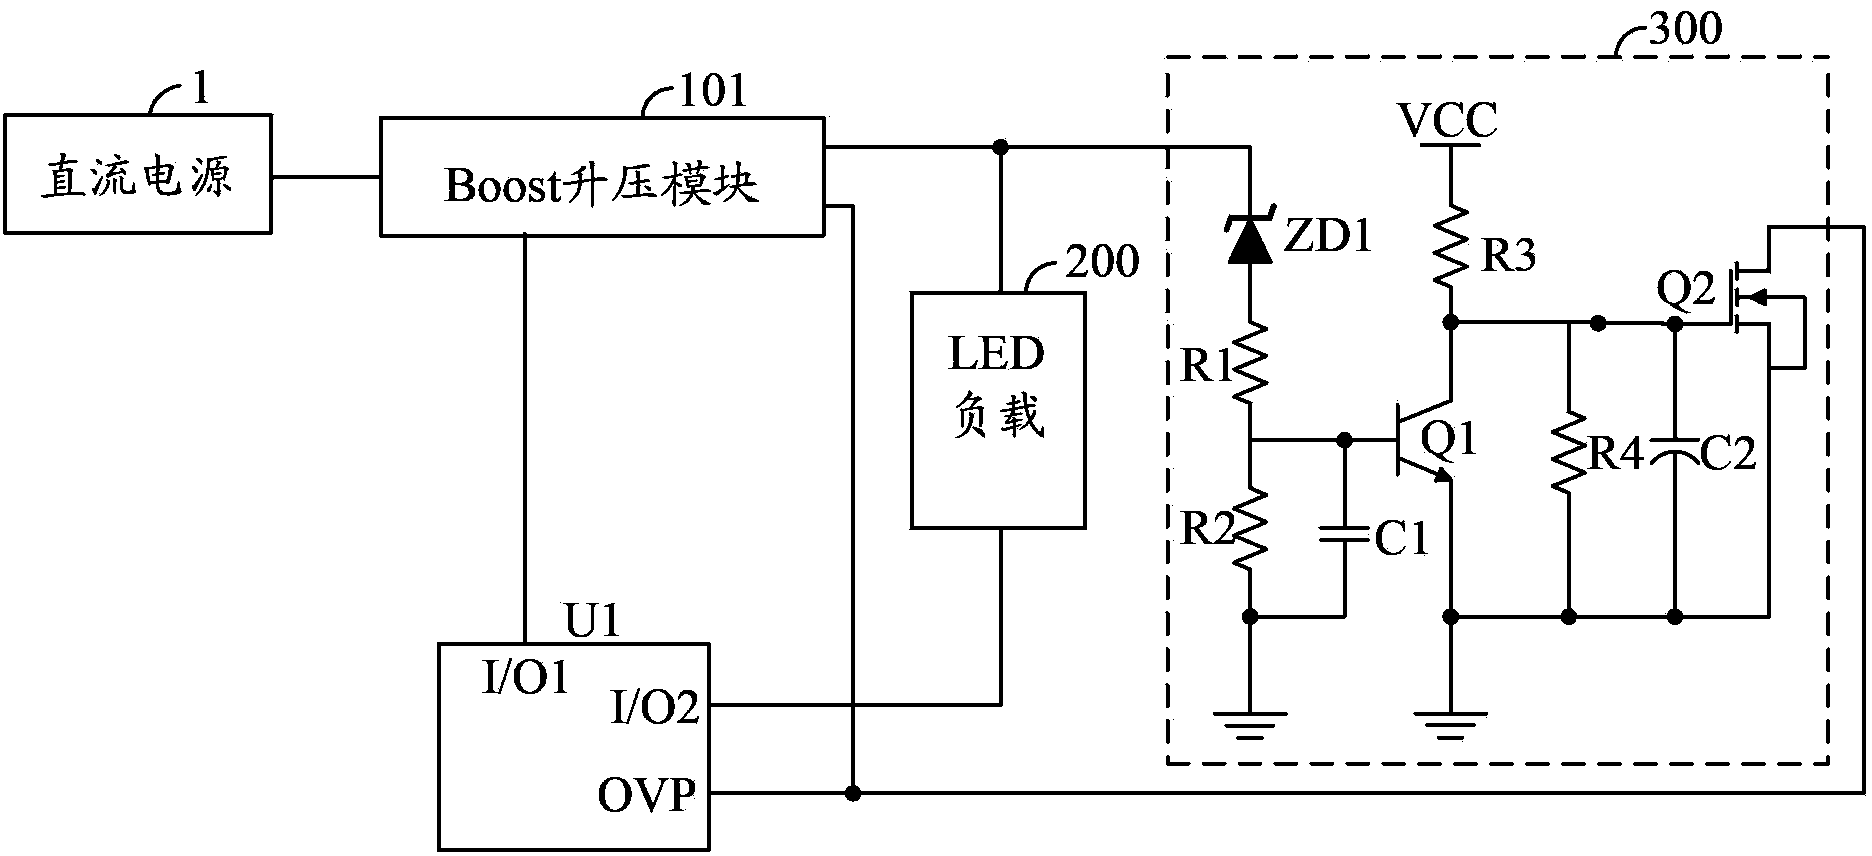 Light-emitting diode (LED) constant current driving circuit and LED lamp